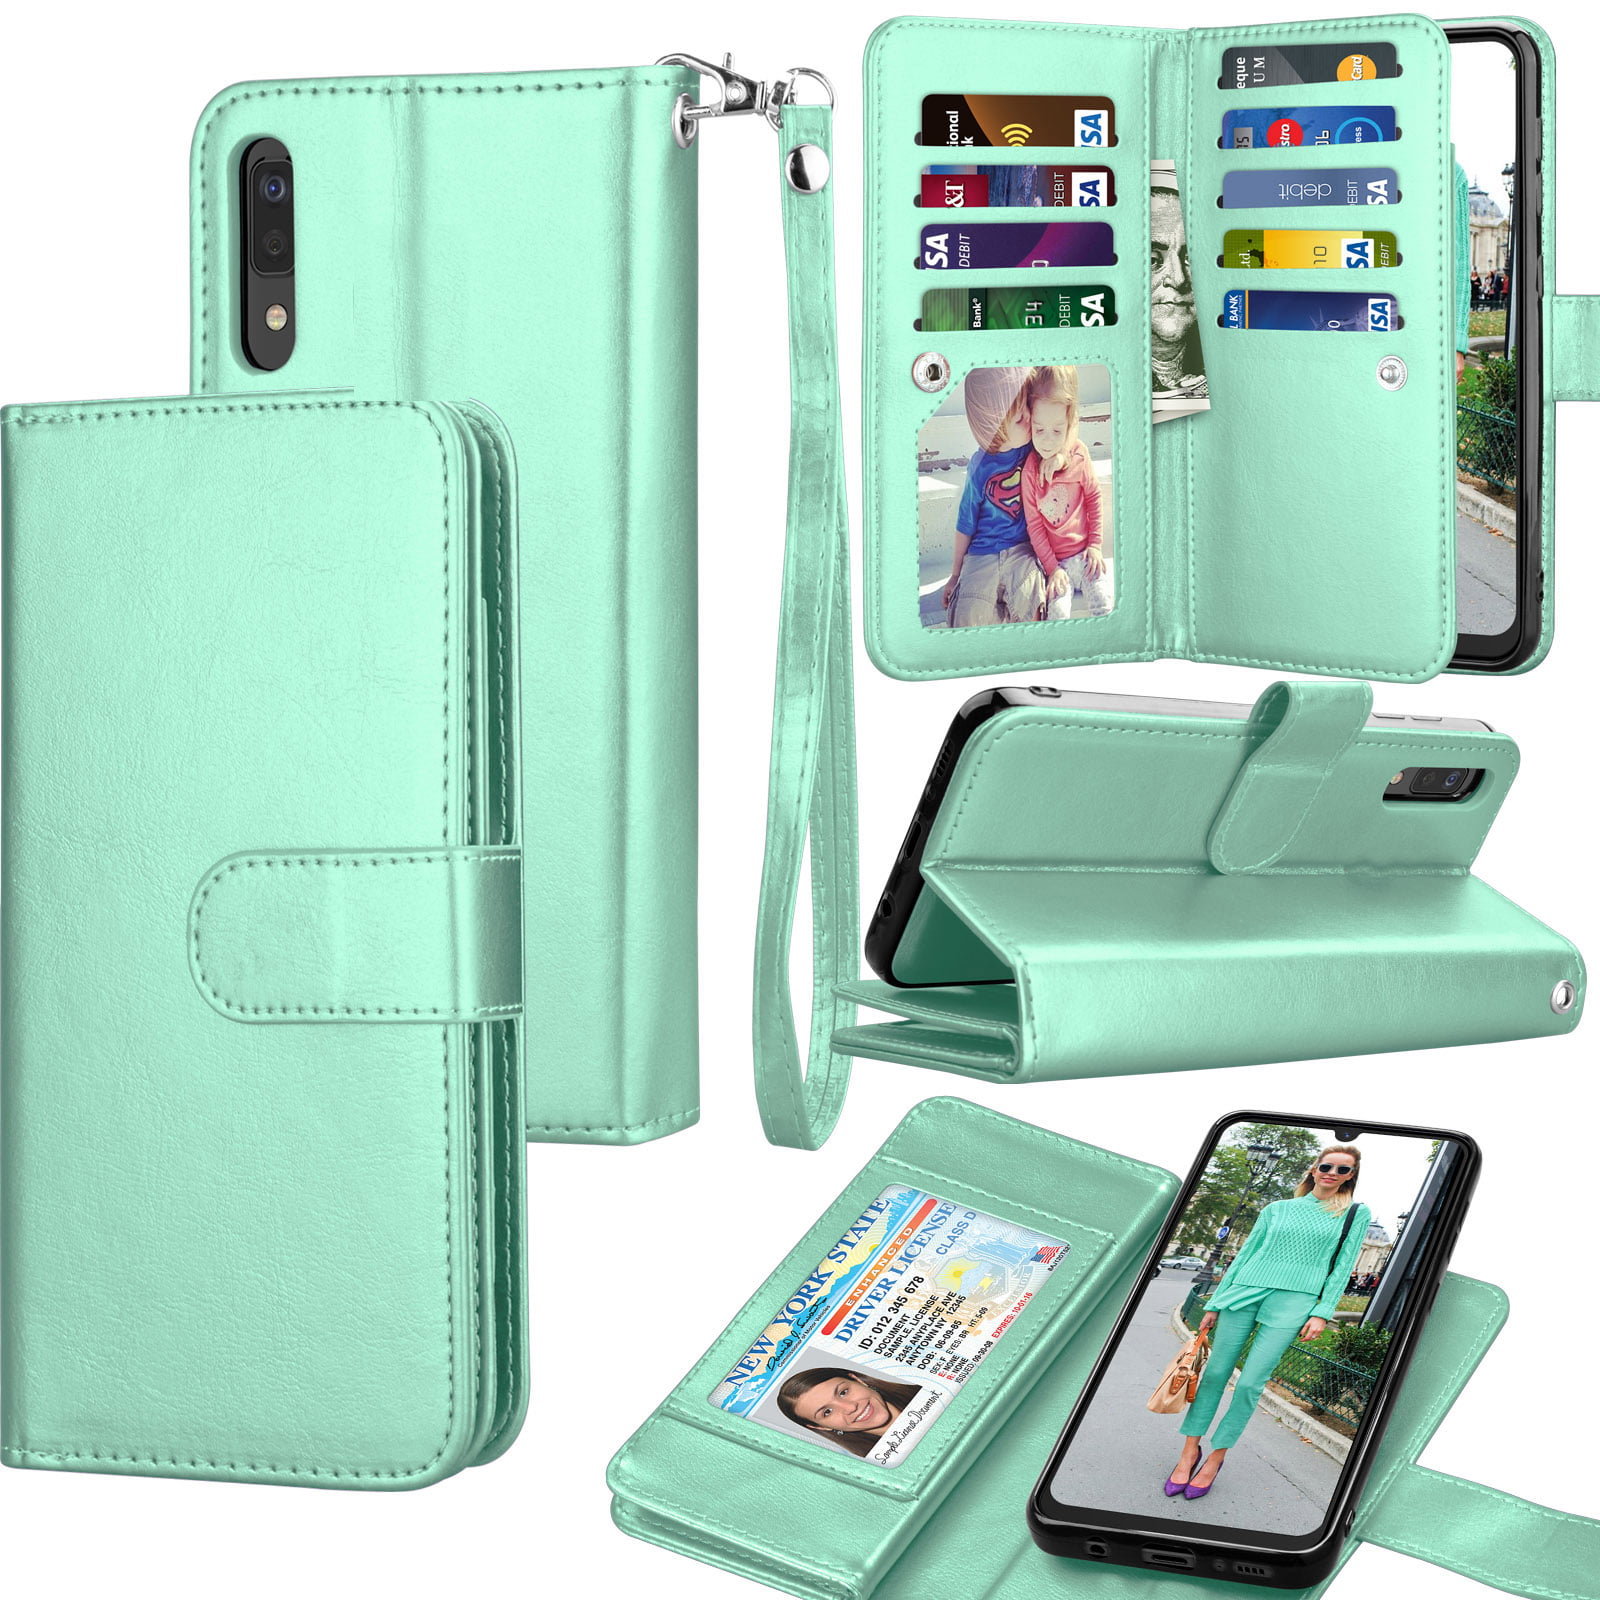 Stylish Cover Compatible with Samsung Galaxy A70 Blue Leather Flip Case Wallet for Samsung Galaxy A70 